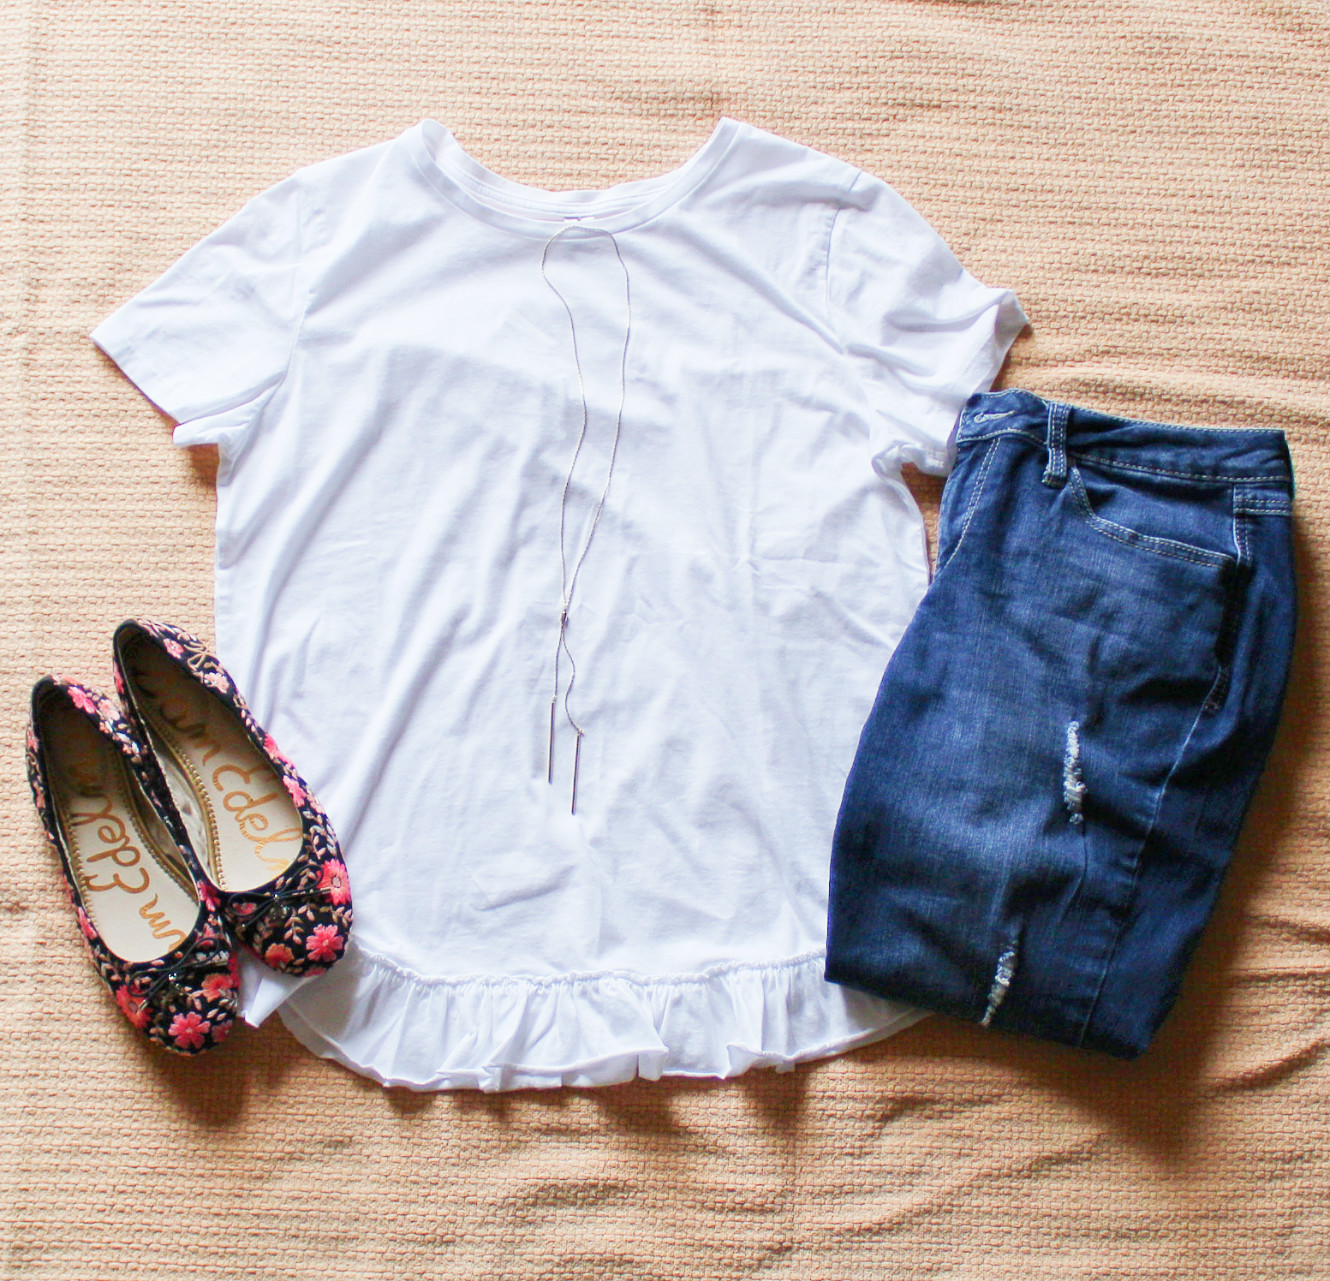 White Tee And Floral Flats With Jeans